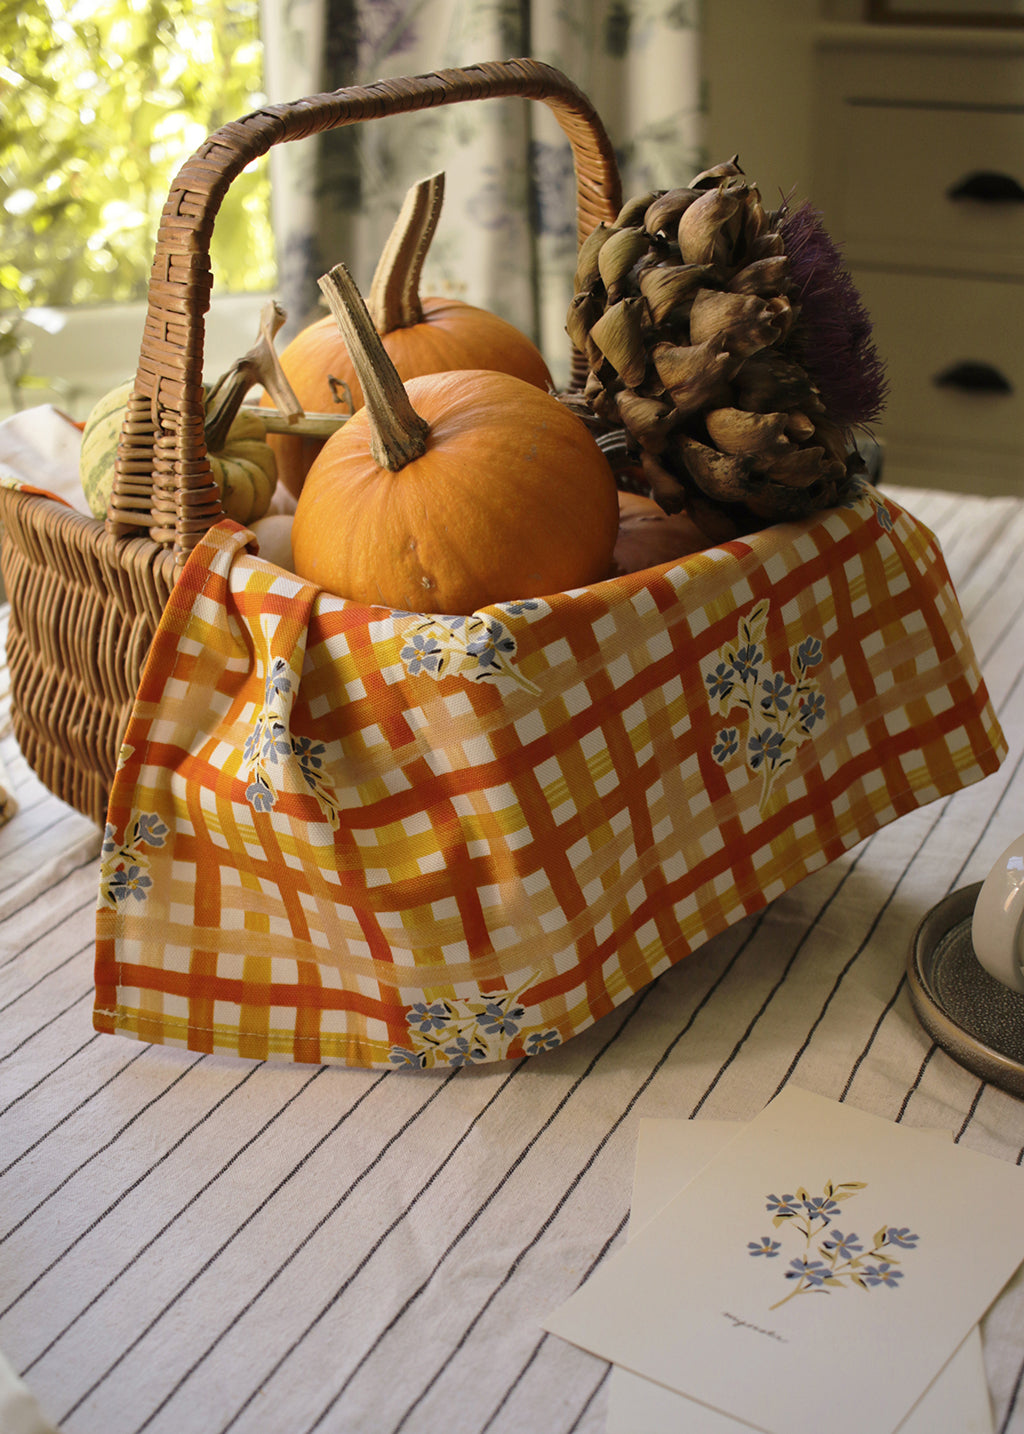 the gingham and floral  patterned teatowel used to decorate a gift basket of pumpkins and dried flowers